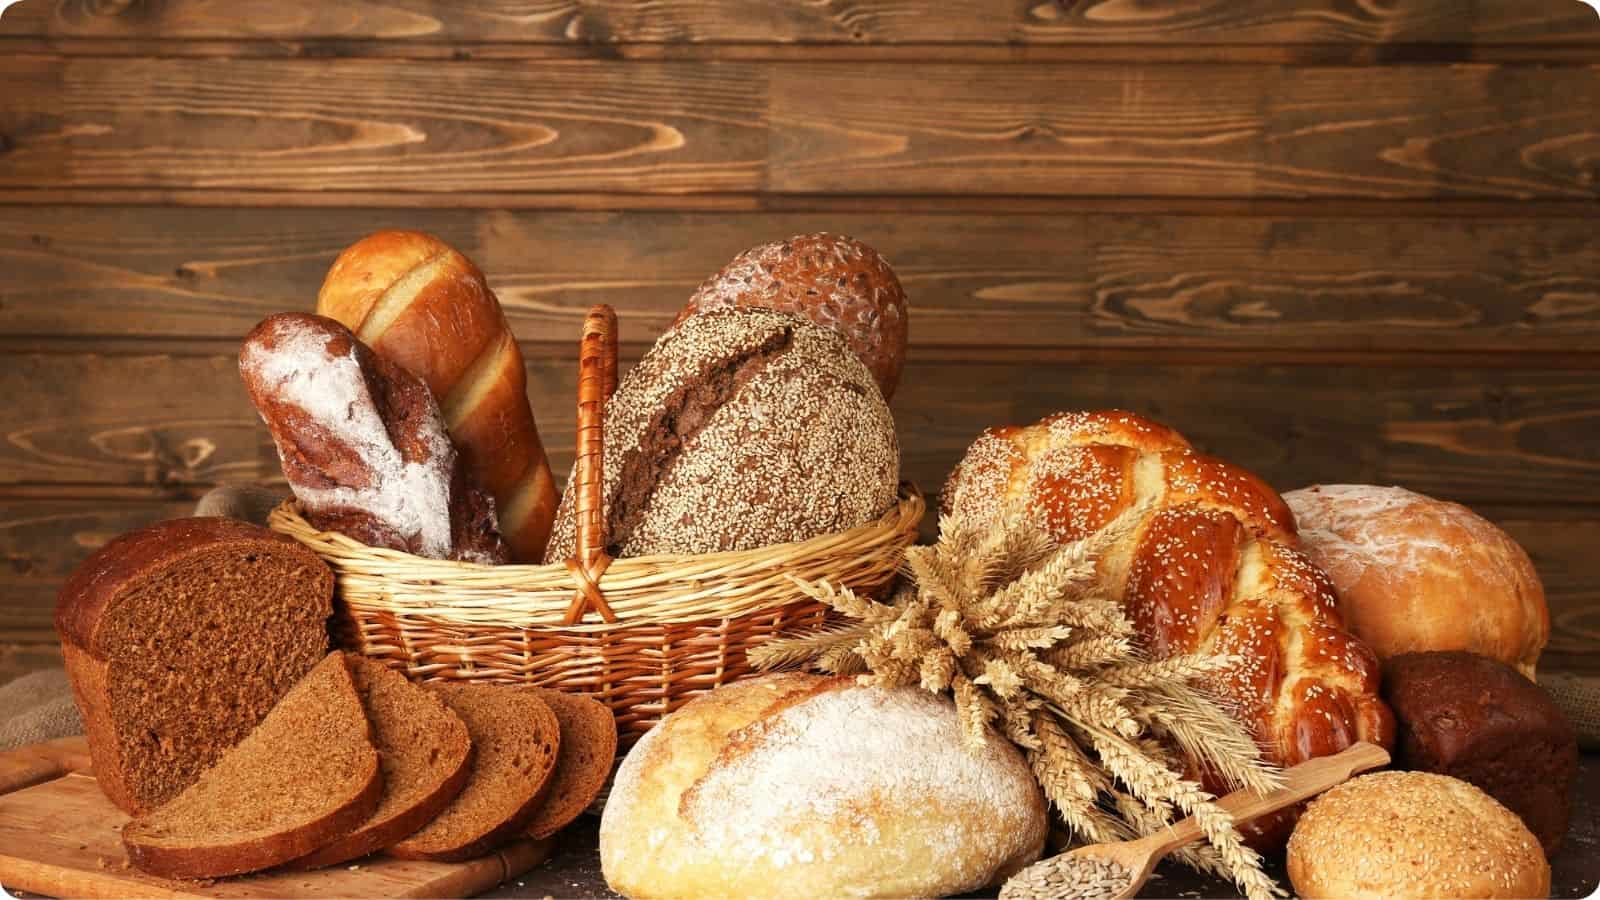 Assorted freshly baked bread in a basket, accompanied by various types displayed on a cutting board, all arranged on a table.